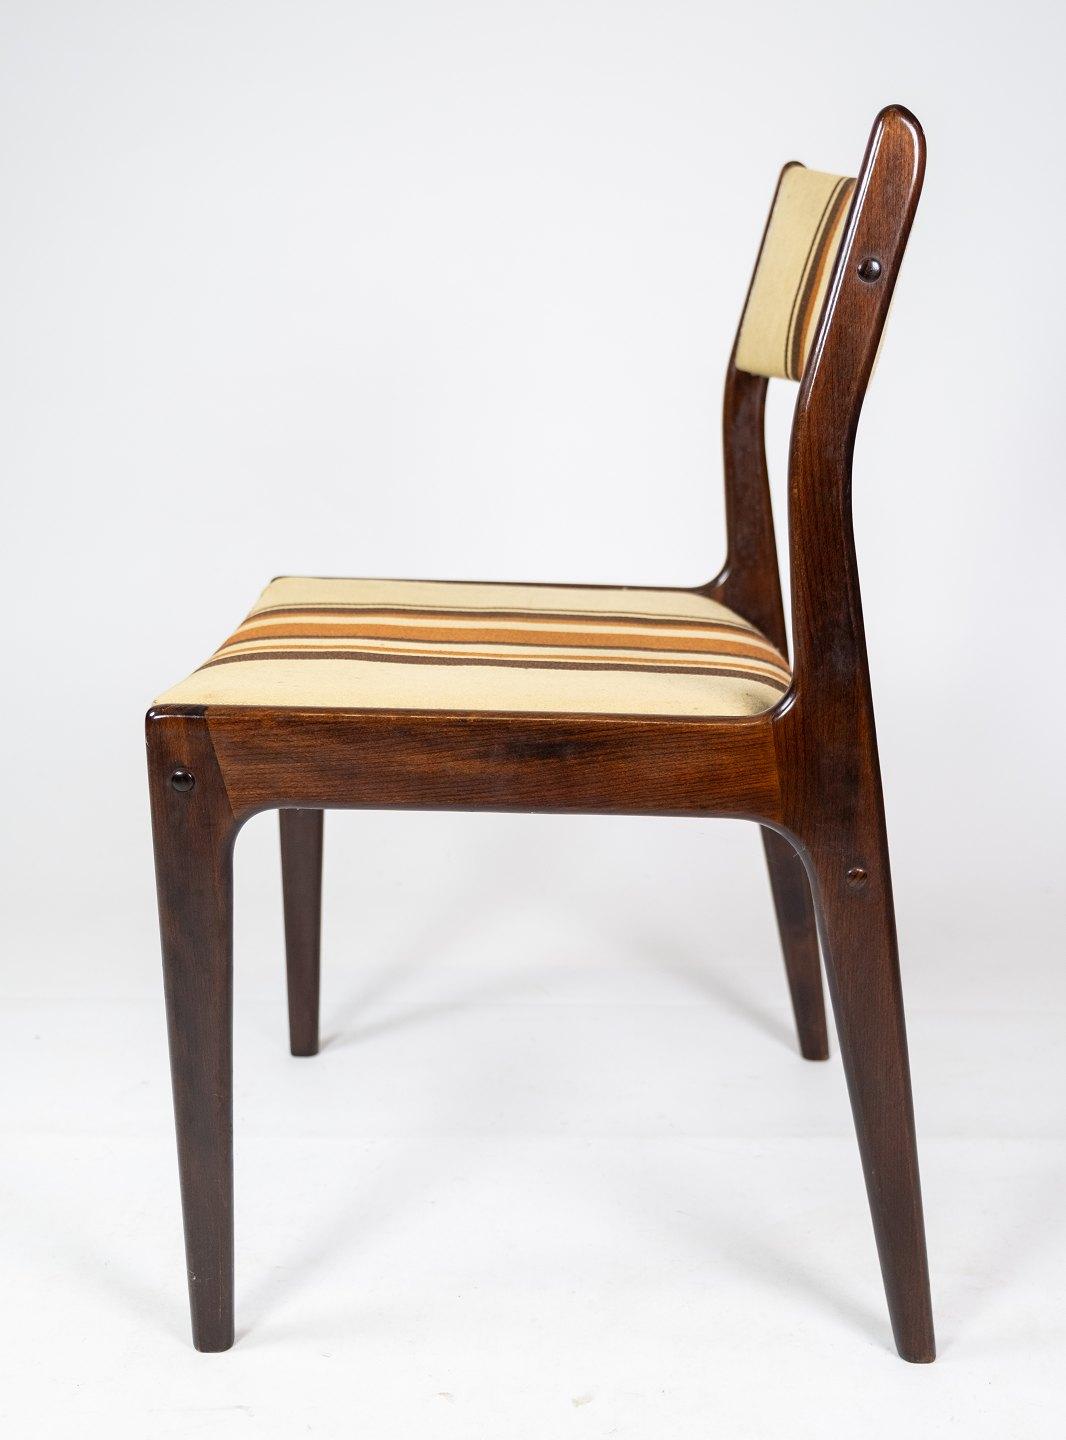 Mid-20th Century Pair of Chairs Made In Dark Wood Made By Uldum Furniture From 1960s For Sale